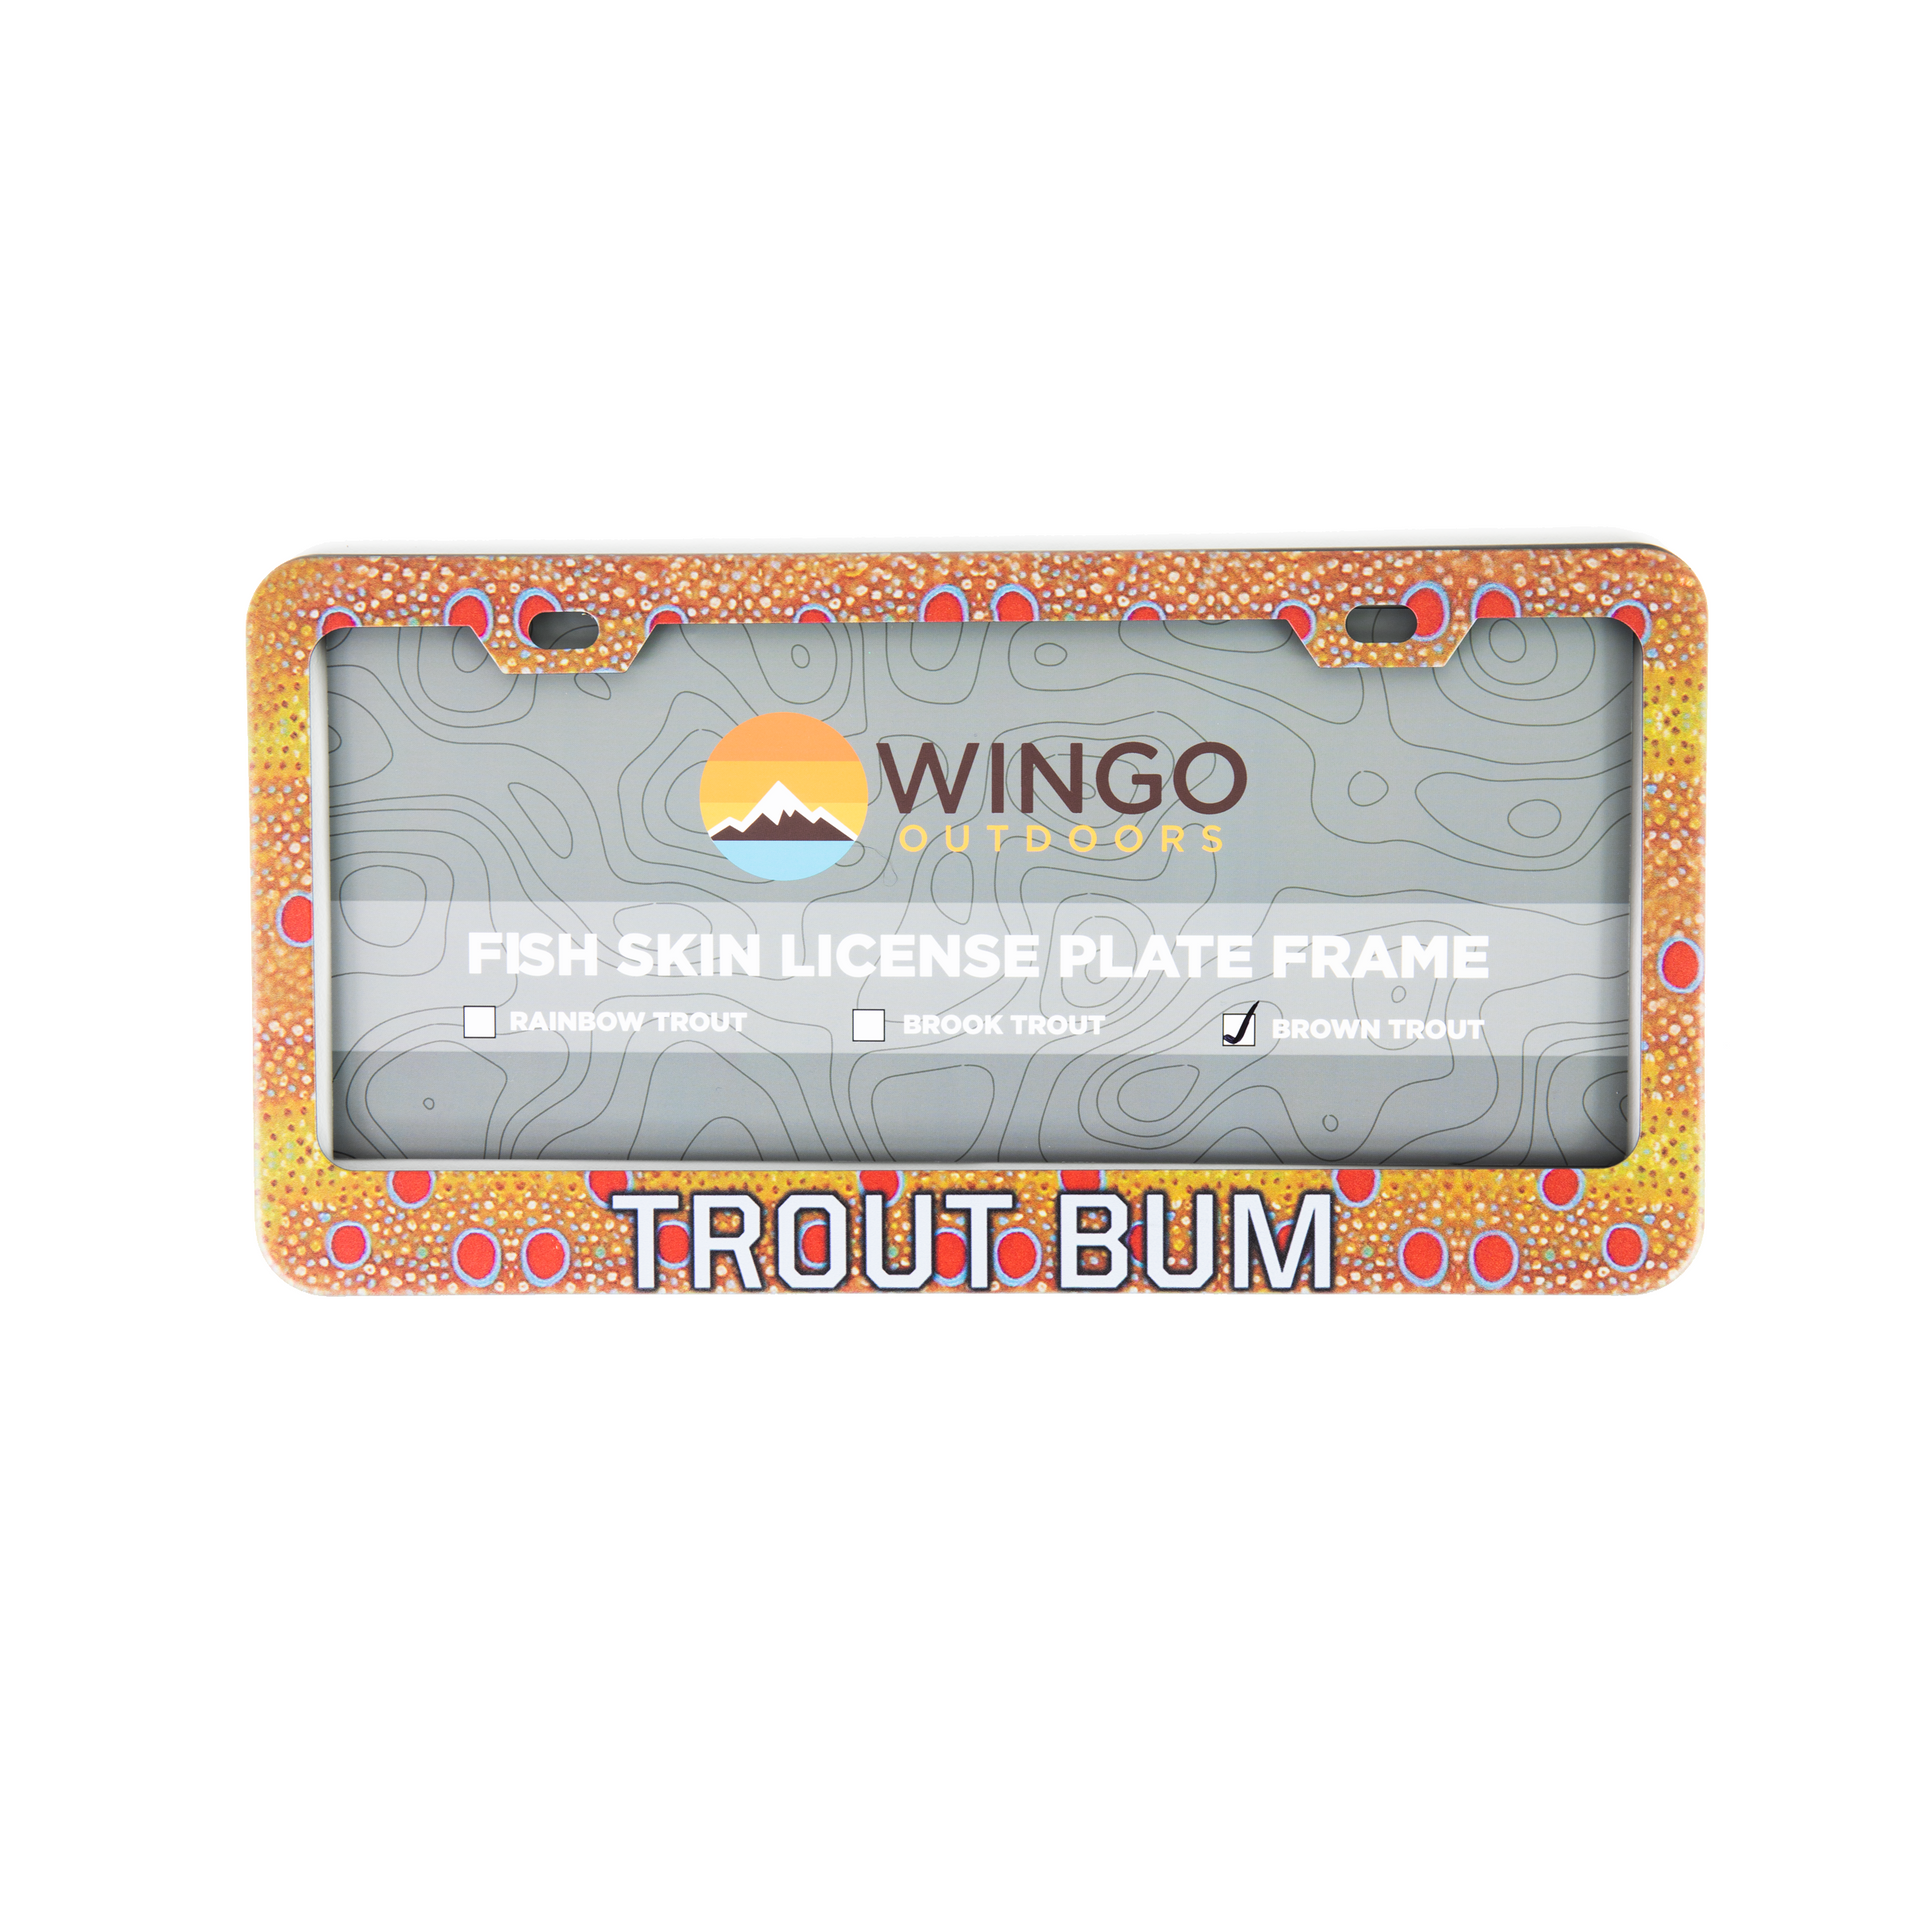 Trout Bum License Plate Frame - Brown Trout (6580596473879)